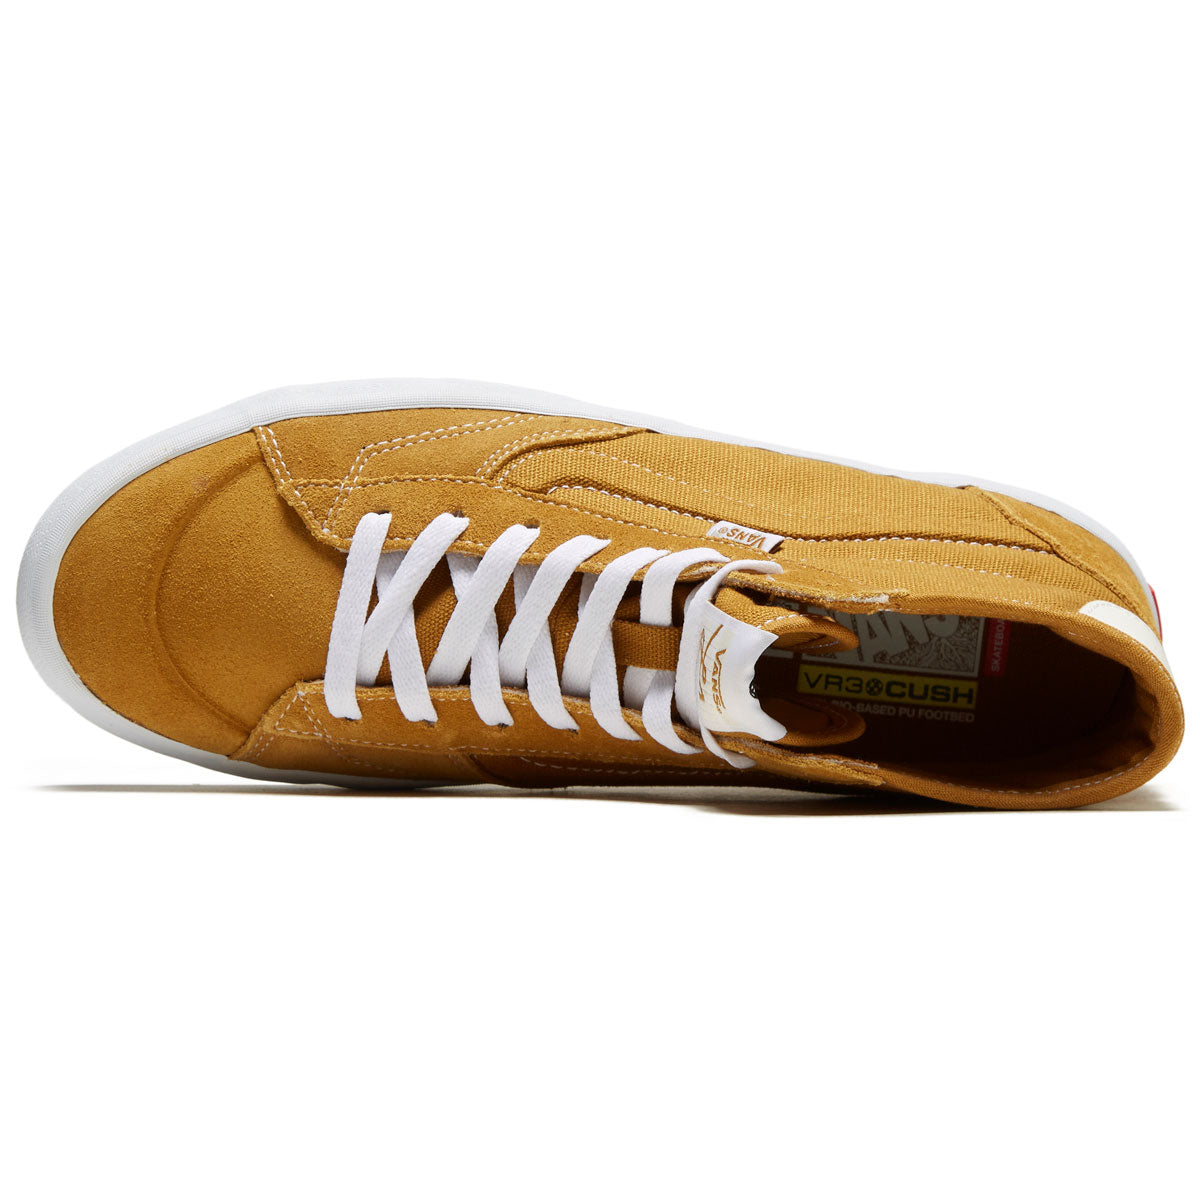 Vans The Lizzie Shoes - Gold/White image 3